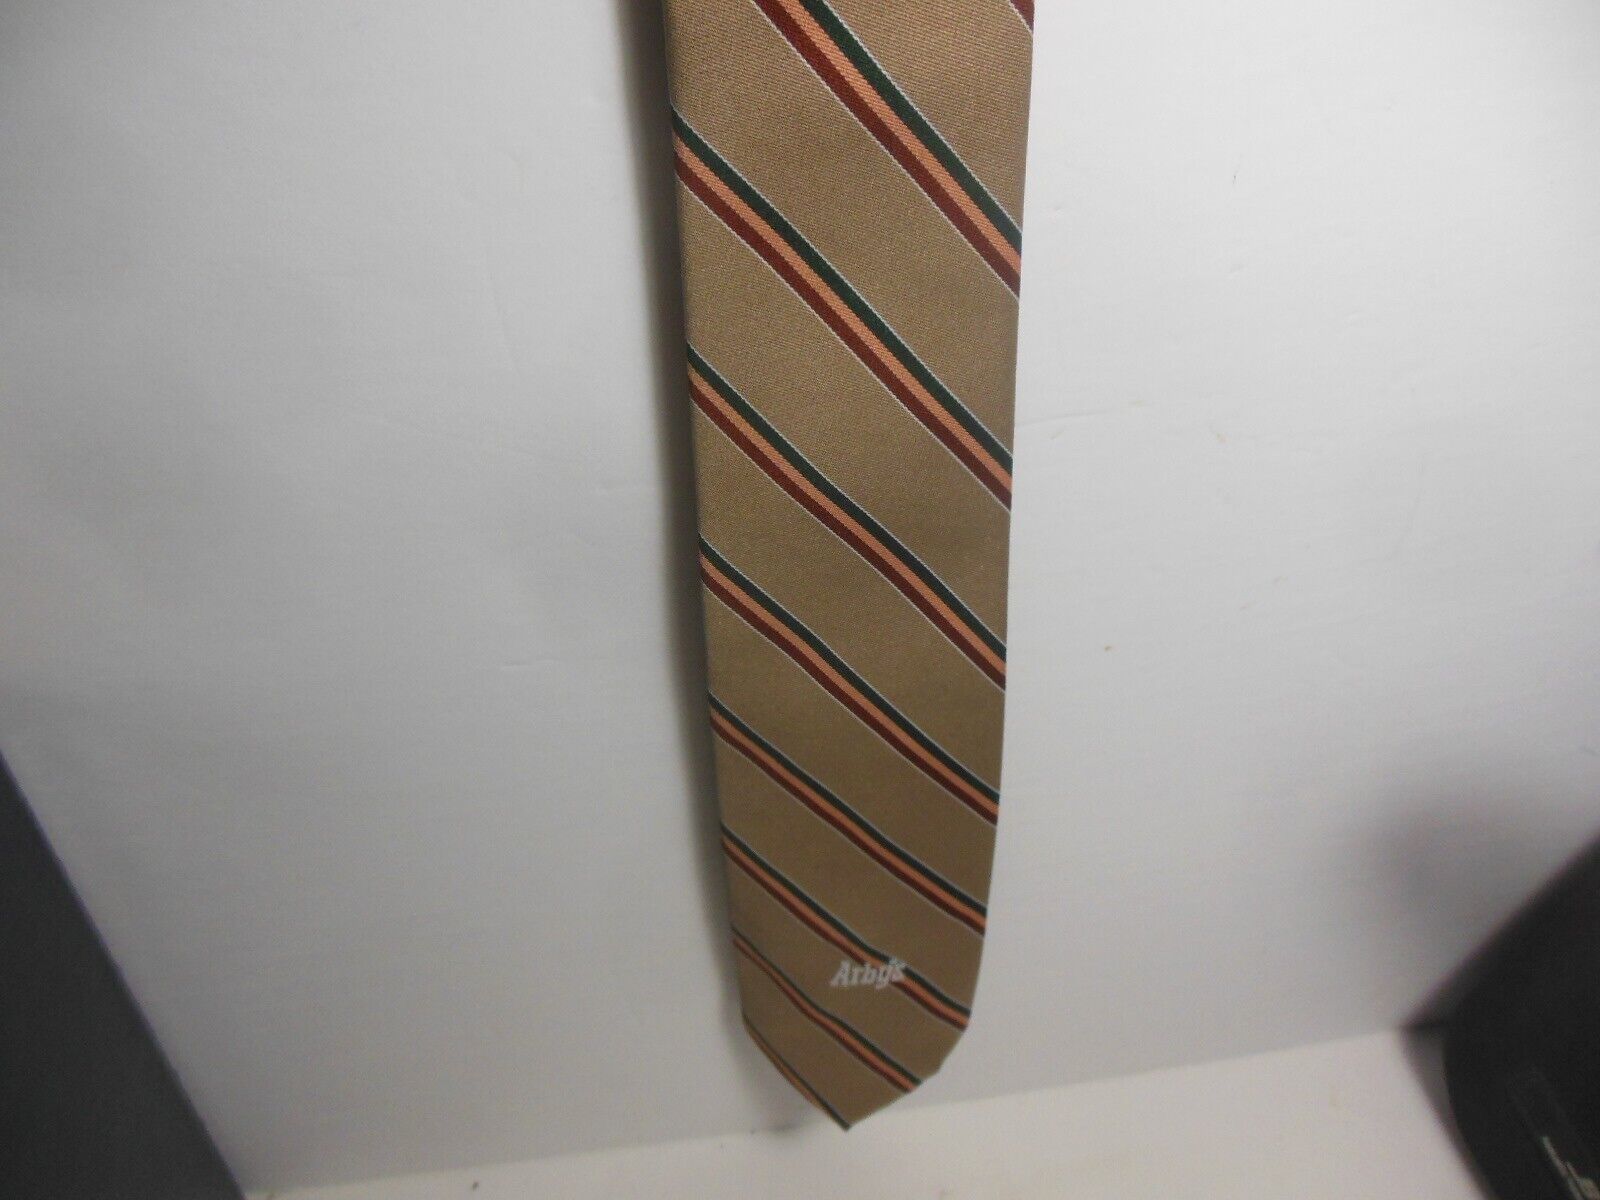 Vintage Arby’s Fast Food Employee Uniform Manager Tie Tan w/ Stripes Polyester